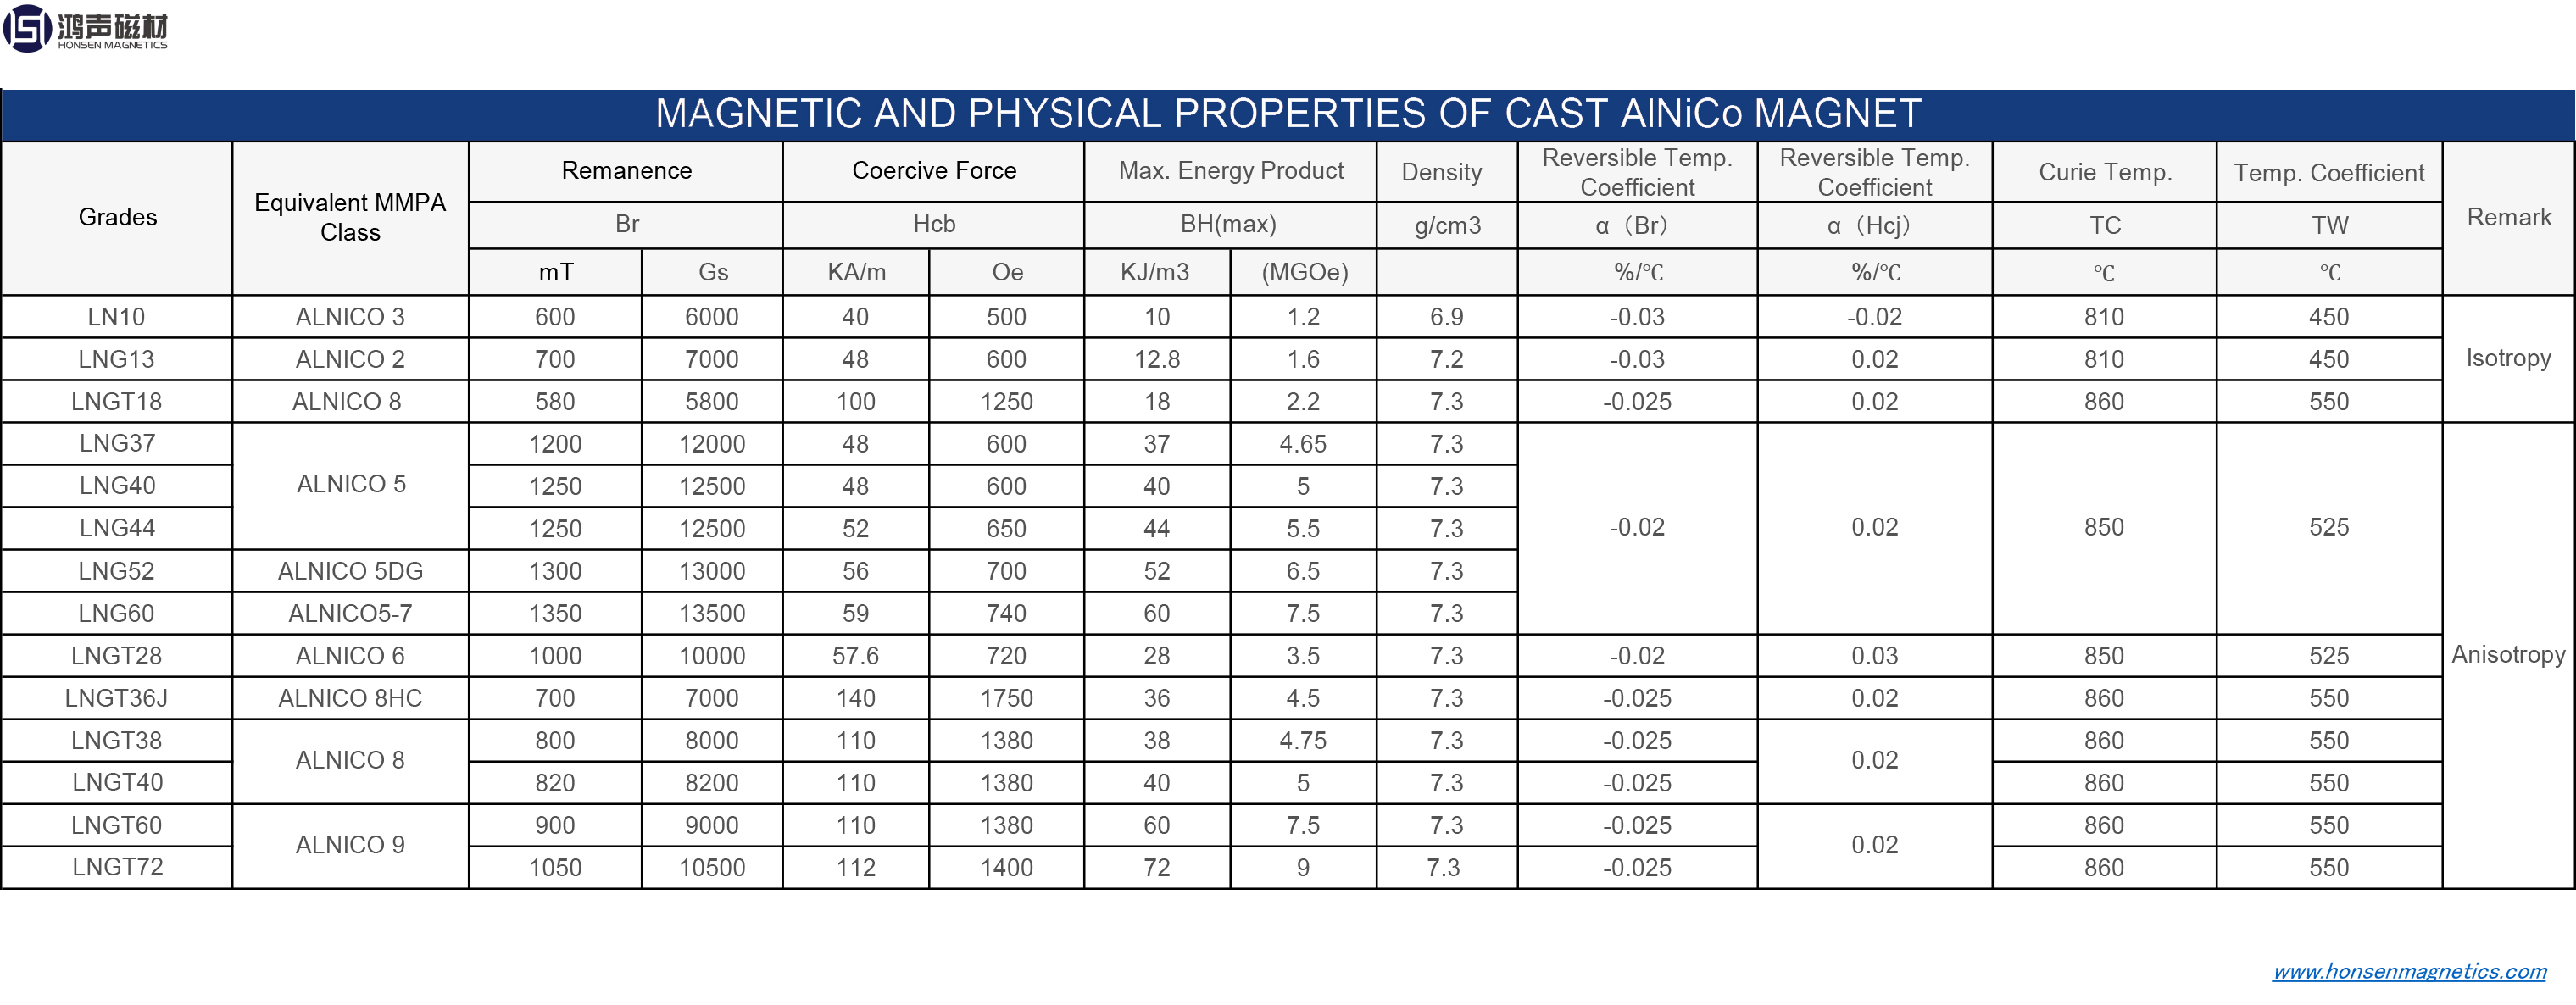 Magnetic Properties of Cast AlNiCo Magnets